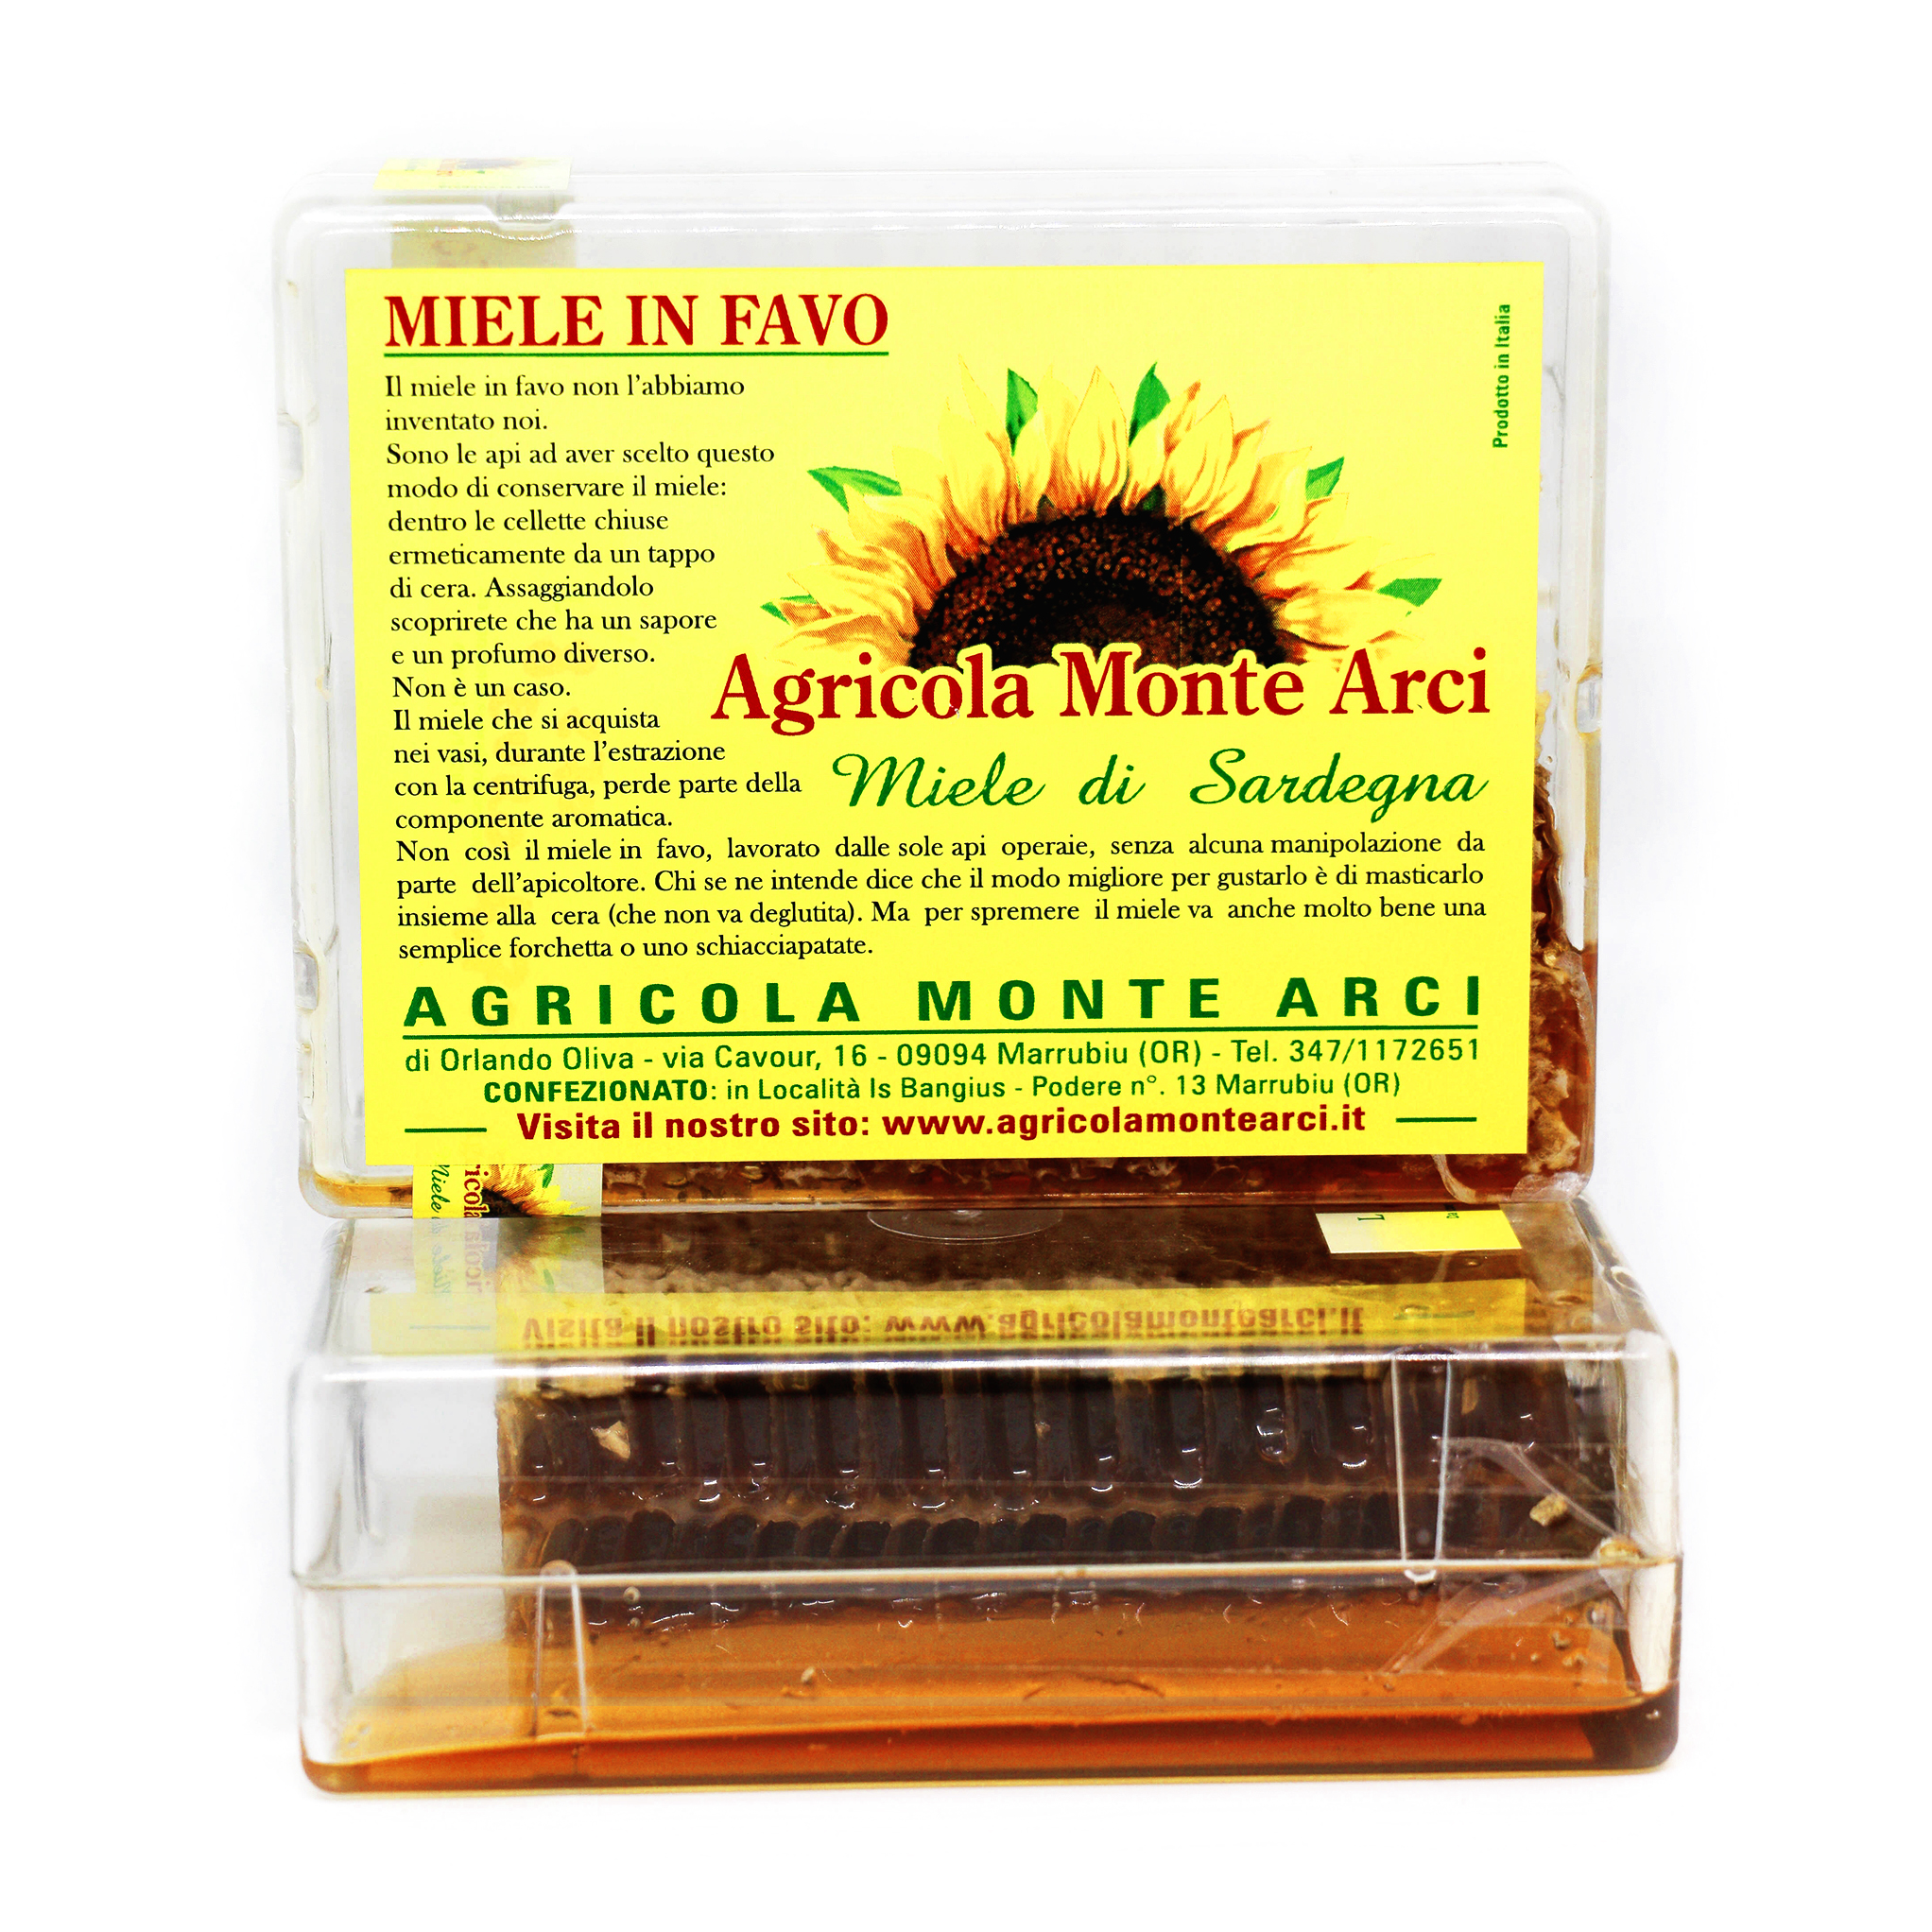 Miele in Favo – AgricolaMonteArci